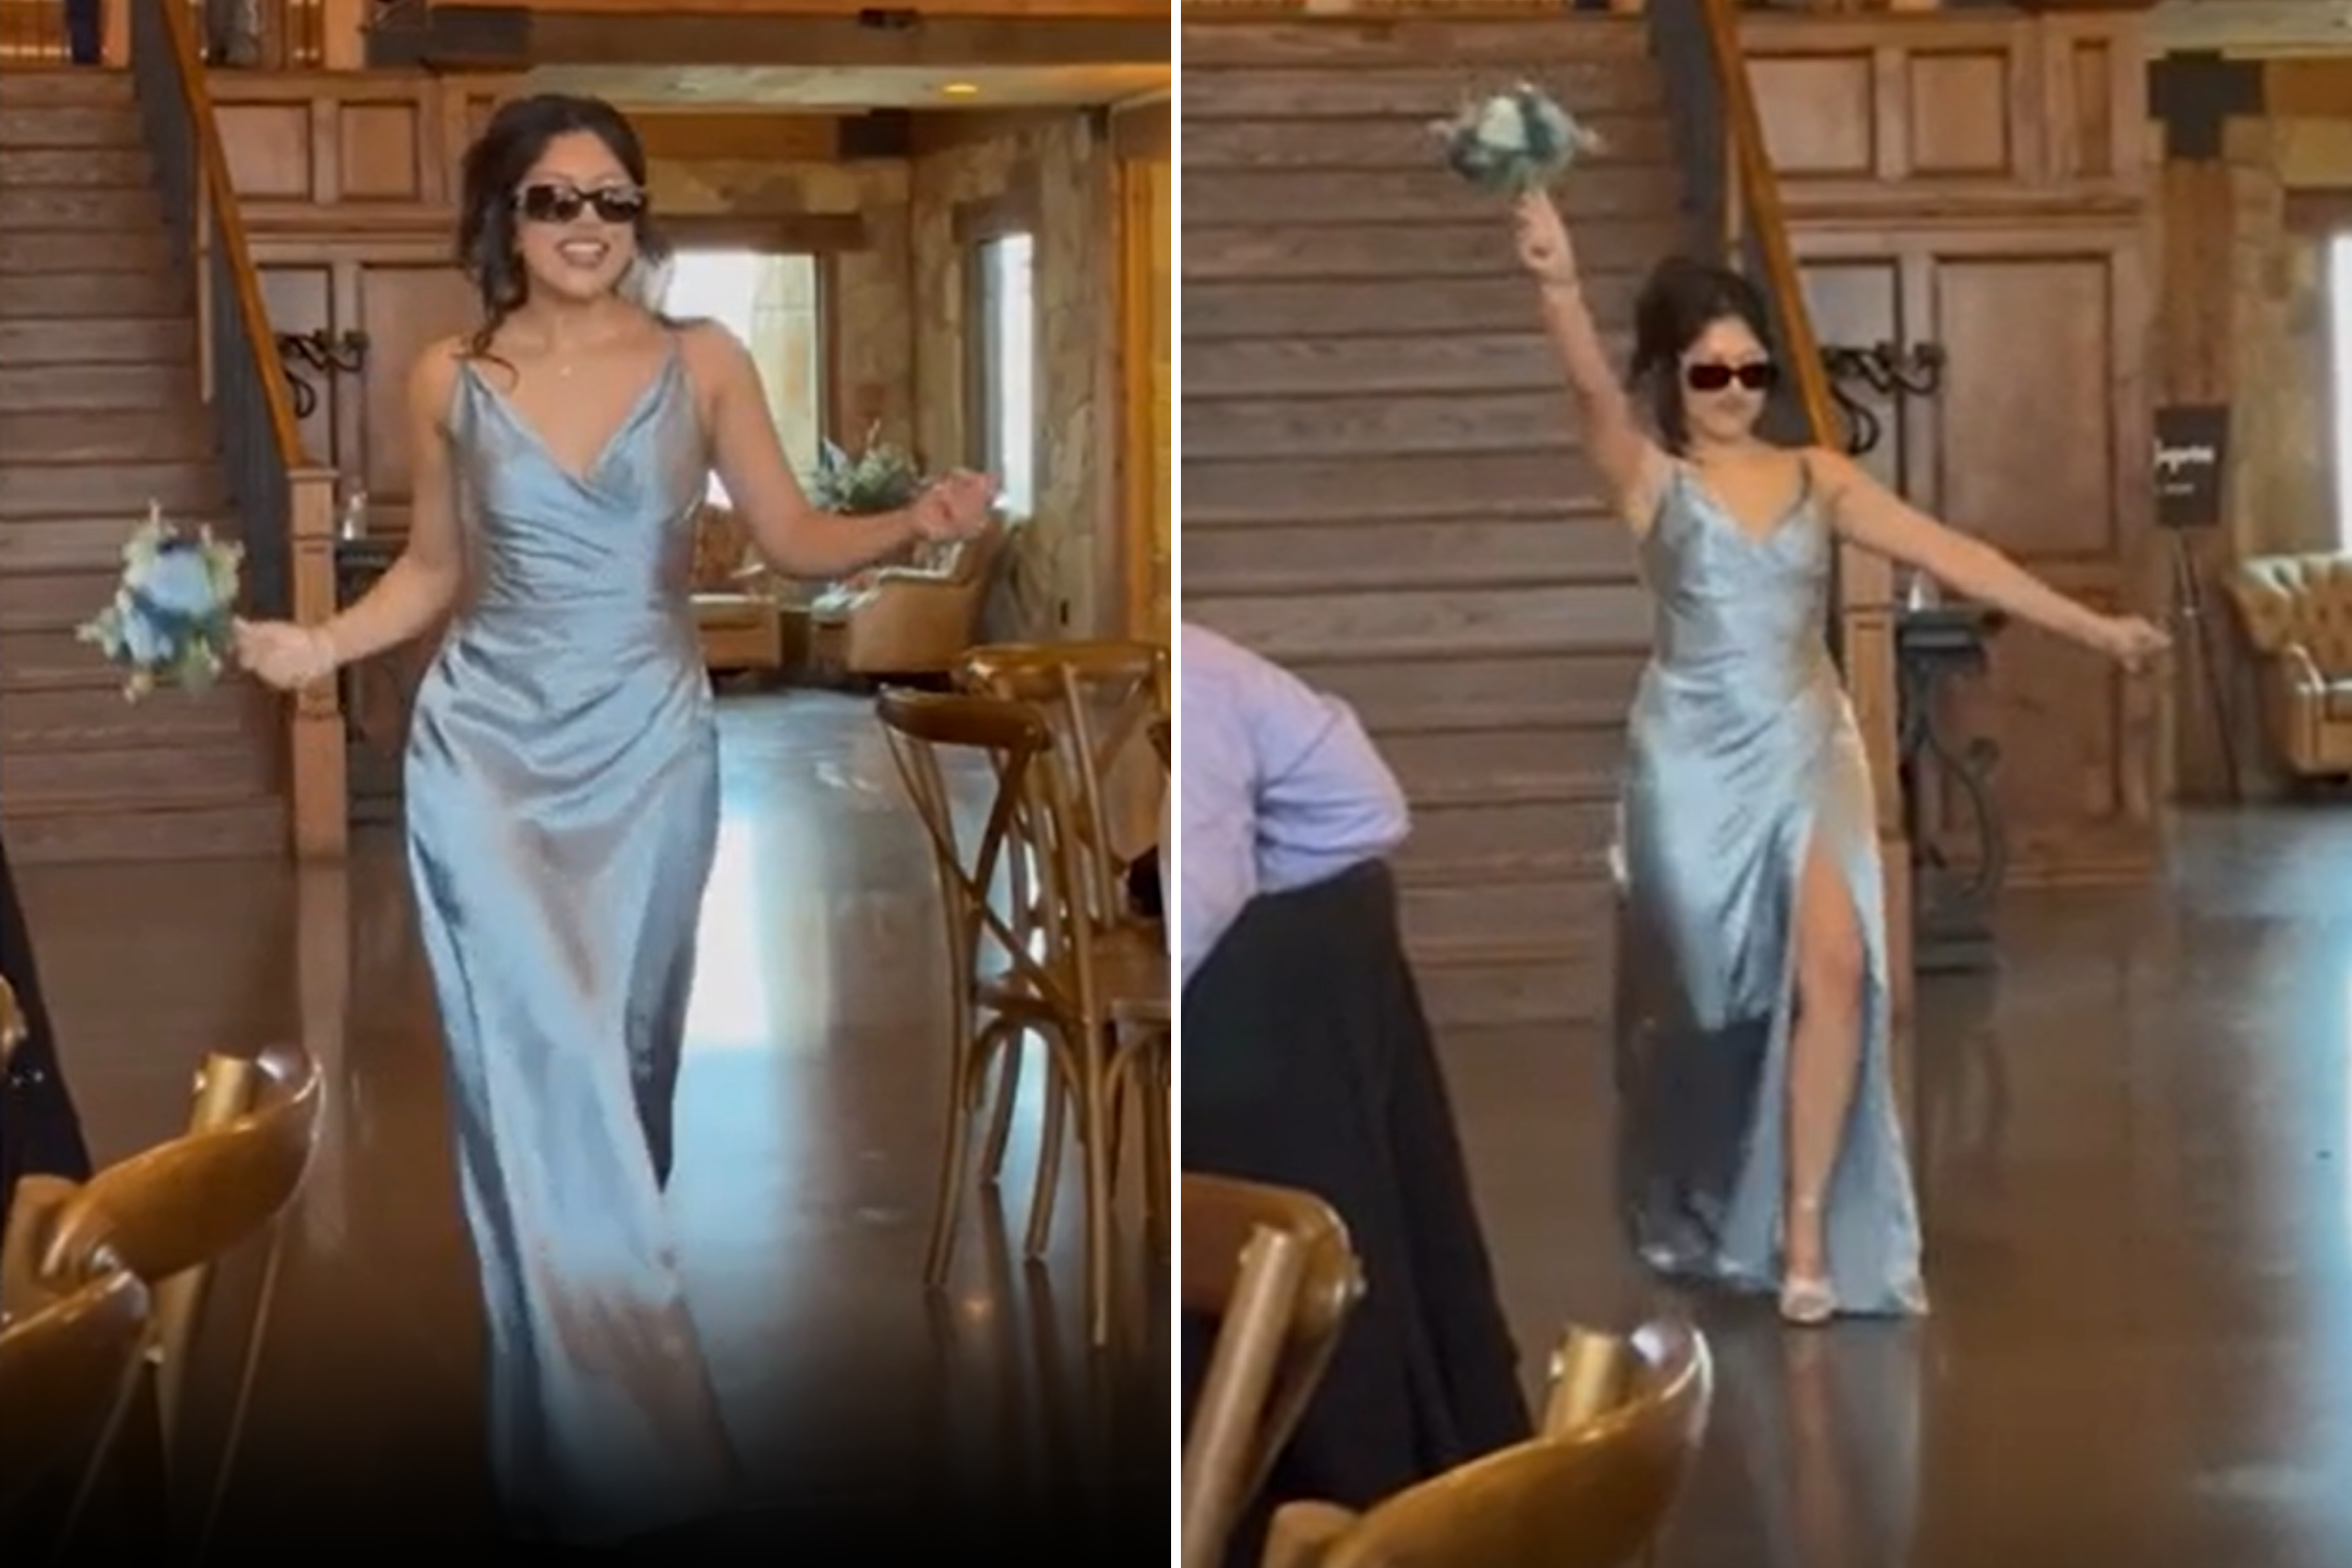 Maid of honor's unconventional entrance to wedding goes viral—"she slayed"